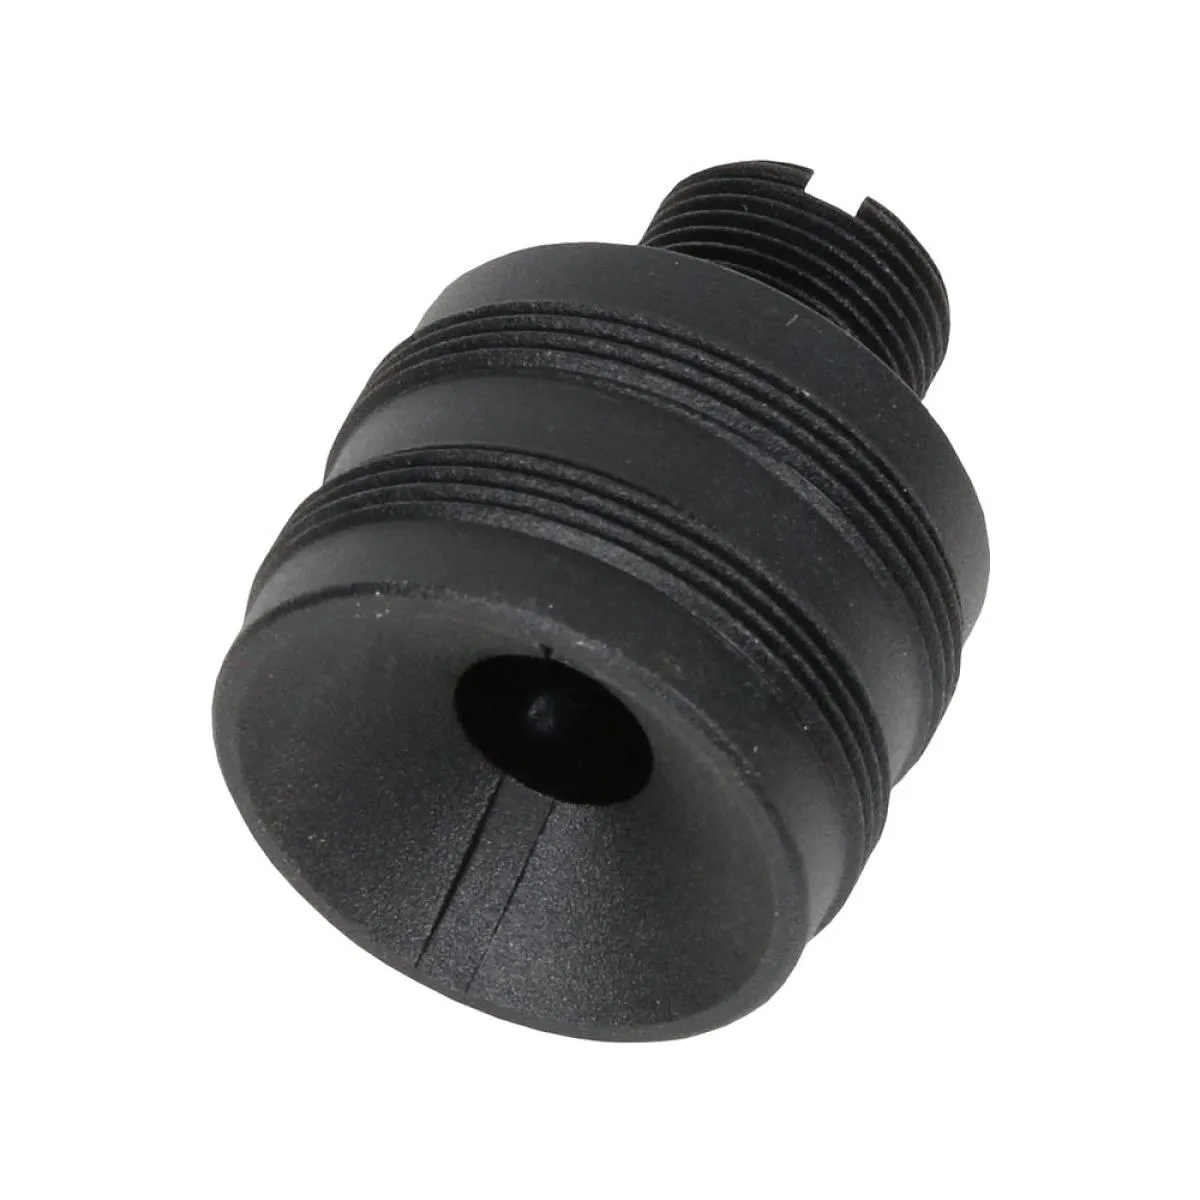 G&G 14mm CCW Muzzle/Tracer Adaptor for SSG-1 Speedsoft